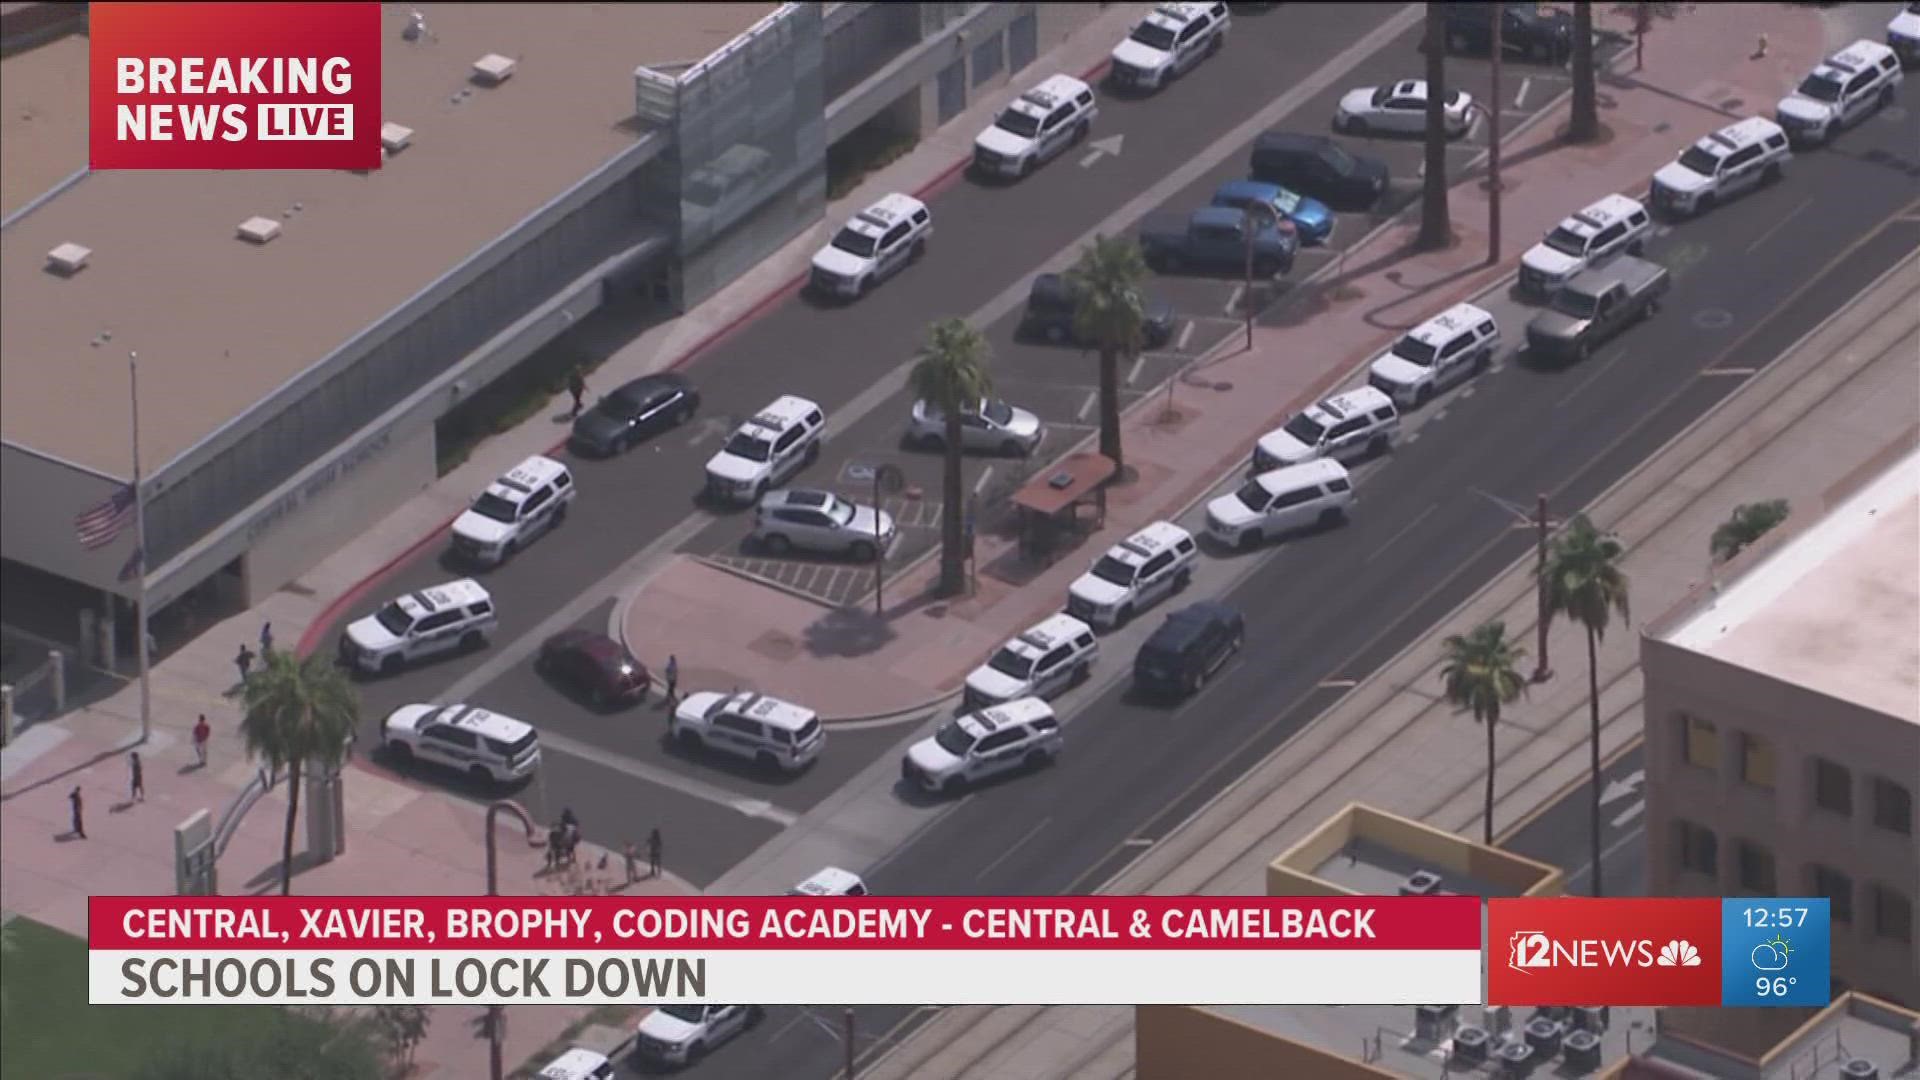 Central High School, Xavier College Preparatory, Brophy College Preparatory and Phoenix Coding Academy are all on lockdown as police search the area.